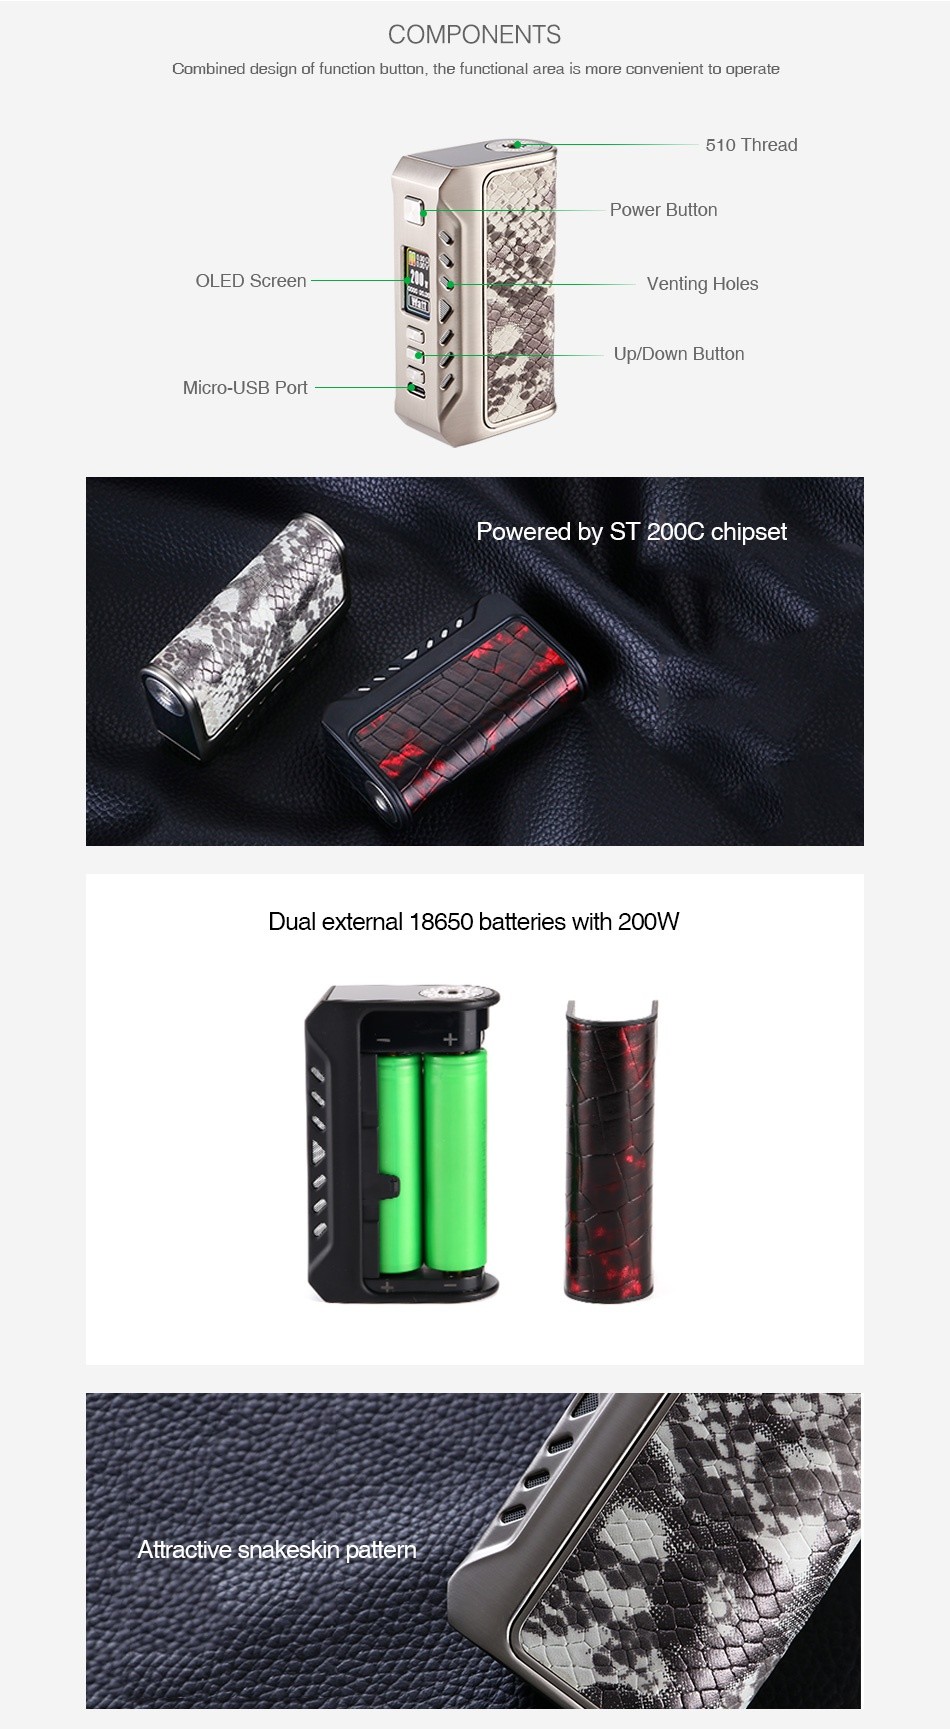 Think Vape Thunder 200W TC Box MOD COMPONENTS Combined design of function button  the functional area is more convenient to operate 510 Thread Power button OLED Screen Venting Holes Up Down Button Micro USB Port Powered by ST 200c chipset Dual external 18650 batteries with 200W Attractive snakeskin pattern